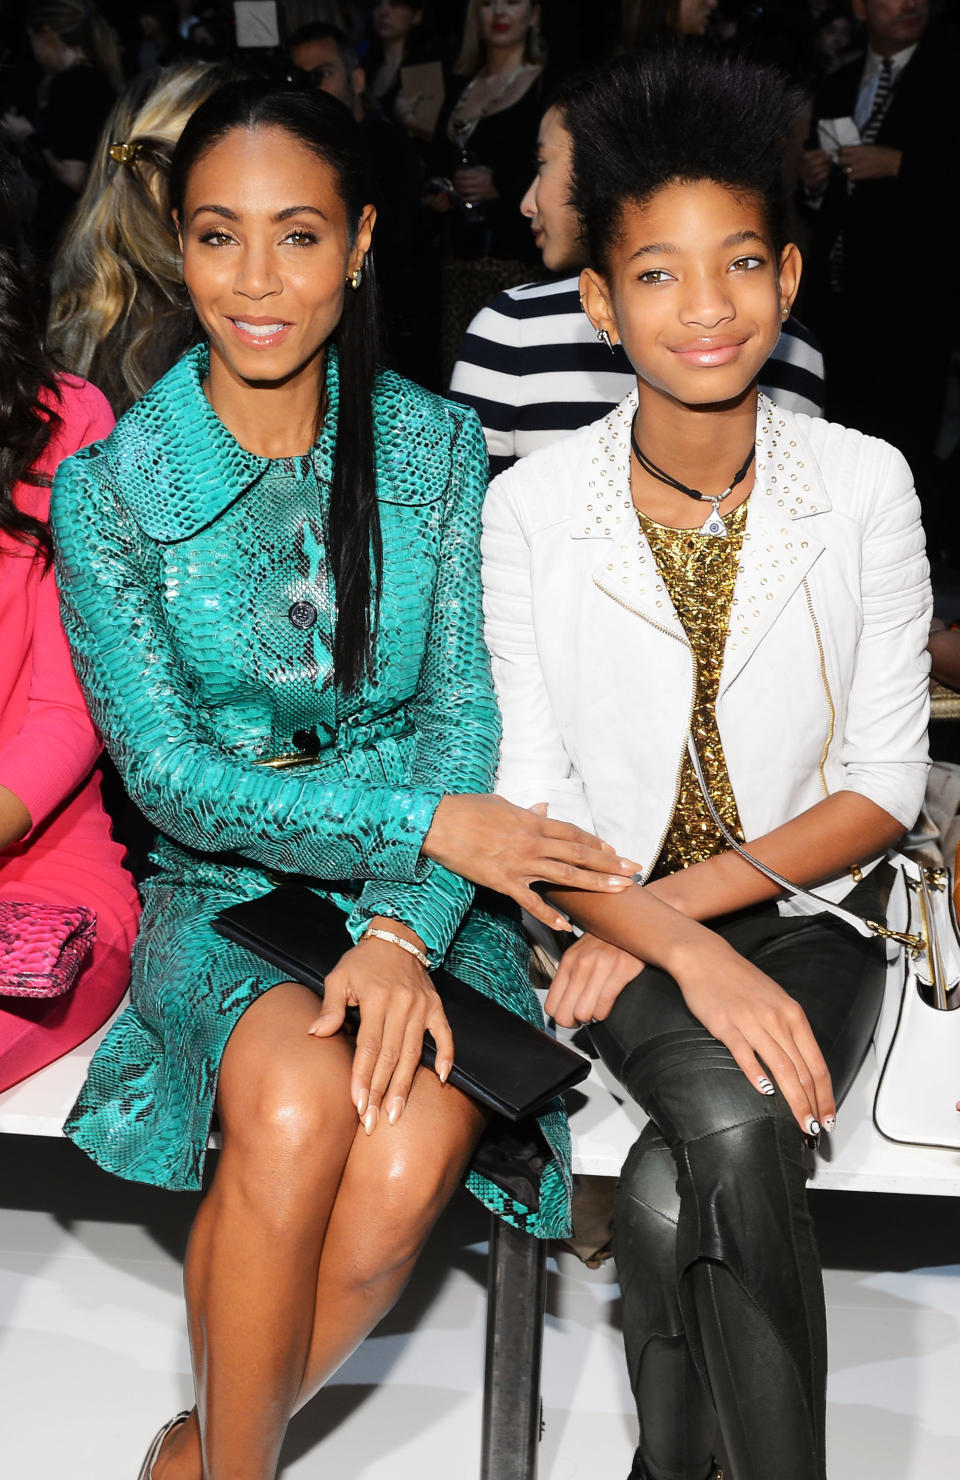 NEW YORK, NY - FEBRUARY 13:  Jada Pinkett Smith and Willow Smith attend the Michael Kors Fall 2013 fashion show during Mercedes-Benz Fashion Week at The Theatre at Lincoln Center on February 13, 2013 in New York City.  (Photo by Dimitrios Kambouris/Getty Images for Michael Kors)